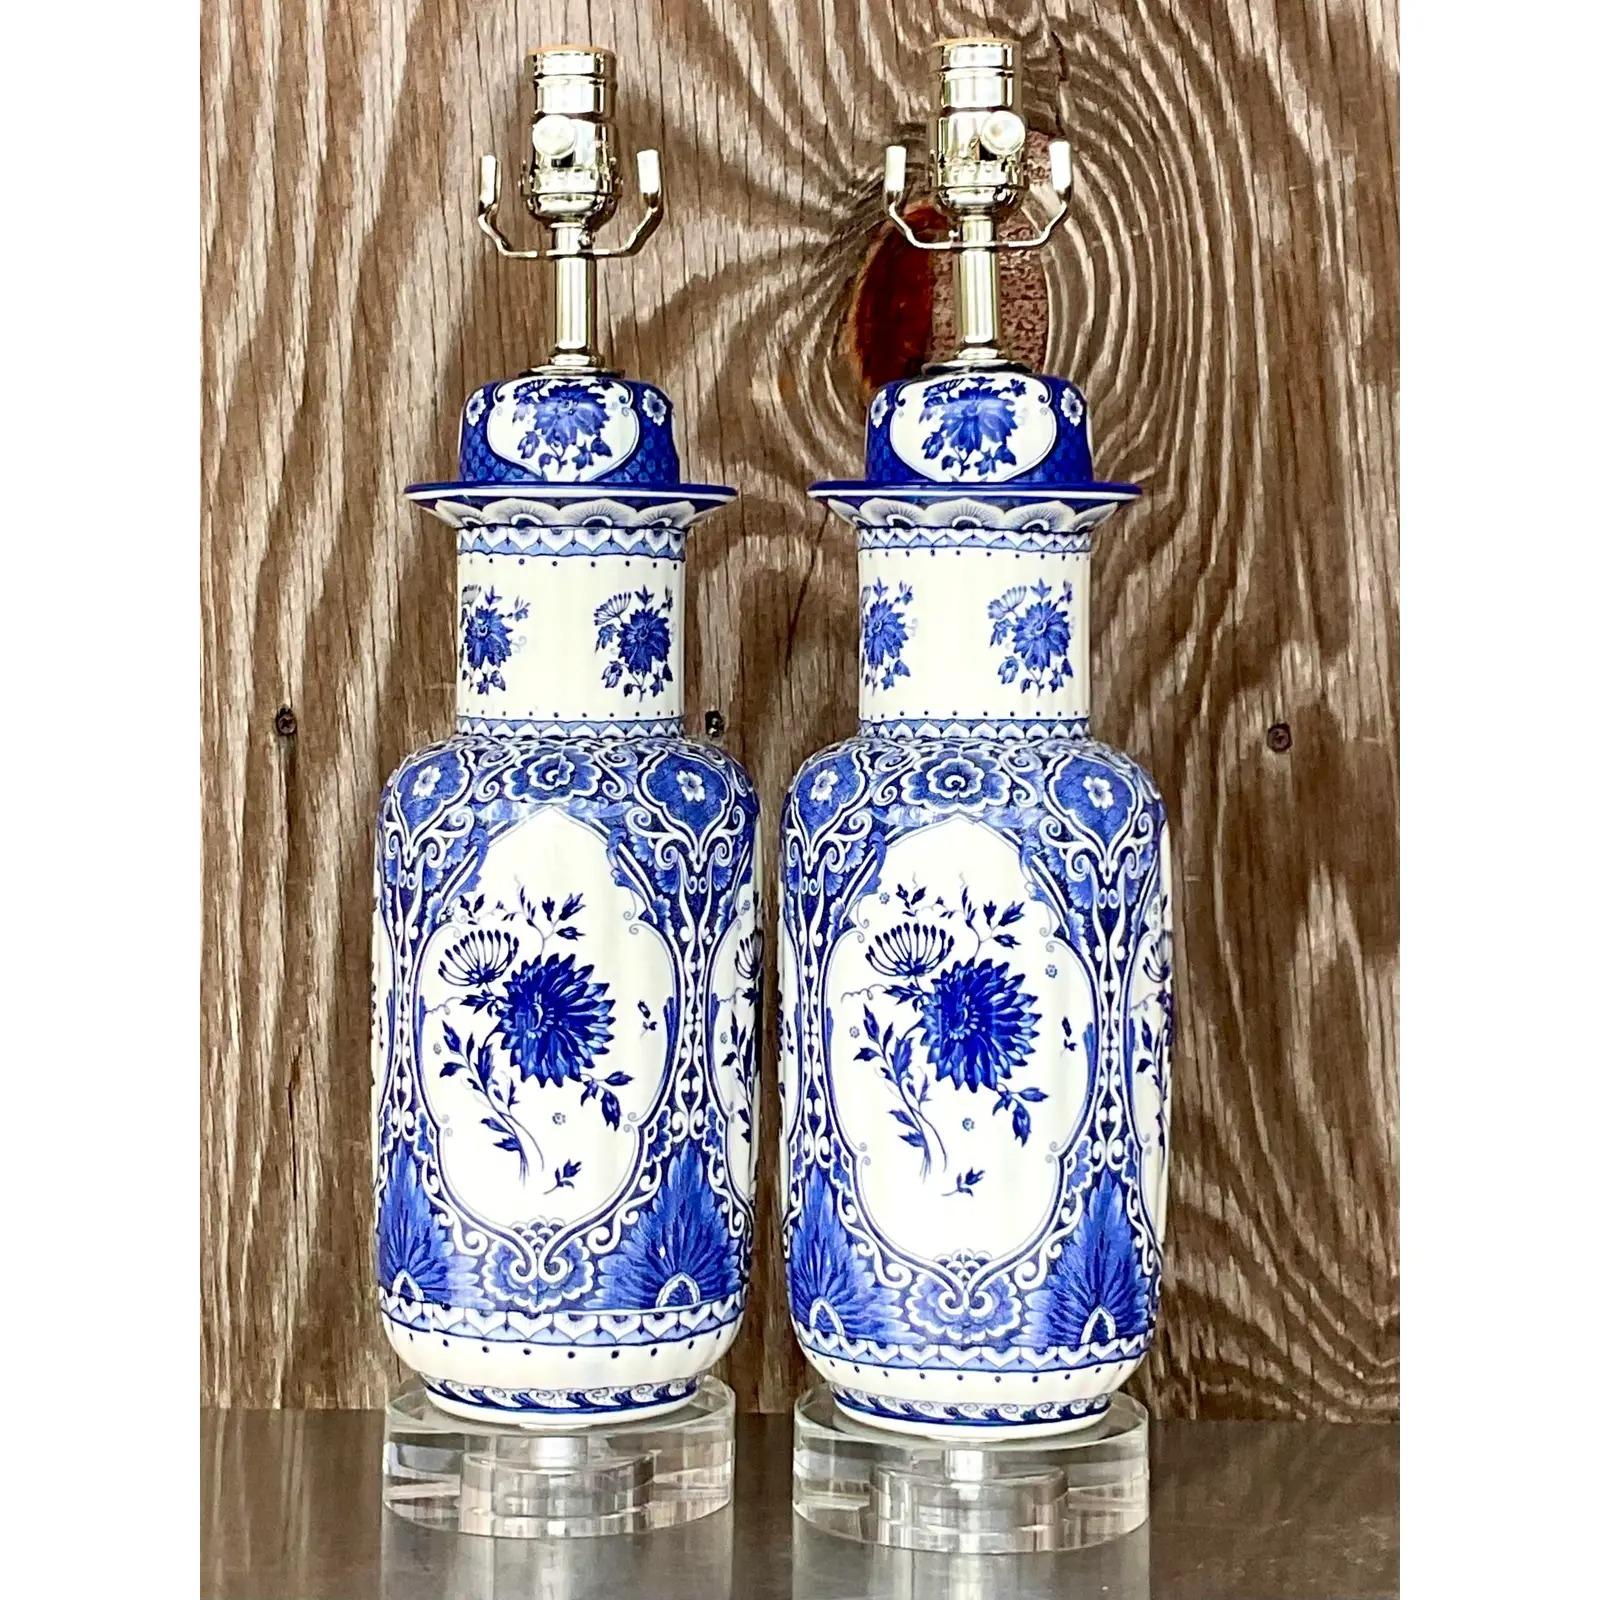 A fabulous pair of vintage Asian table lamps. A beautiful tall jar with classic blue and huge designs. Fully restored with all new hardware and wiring. Acquired from a Palm Beach estate.